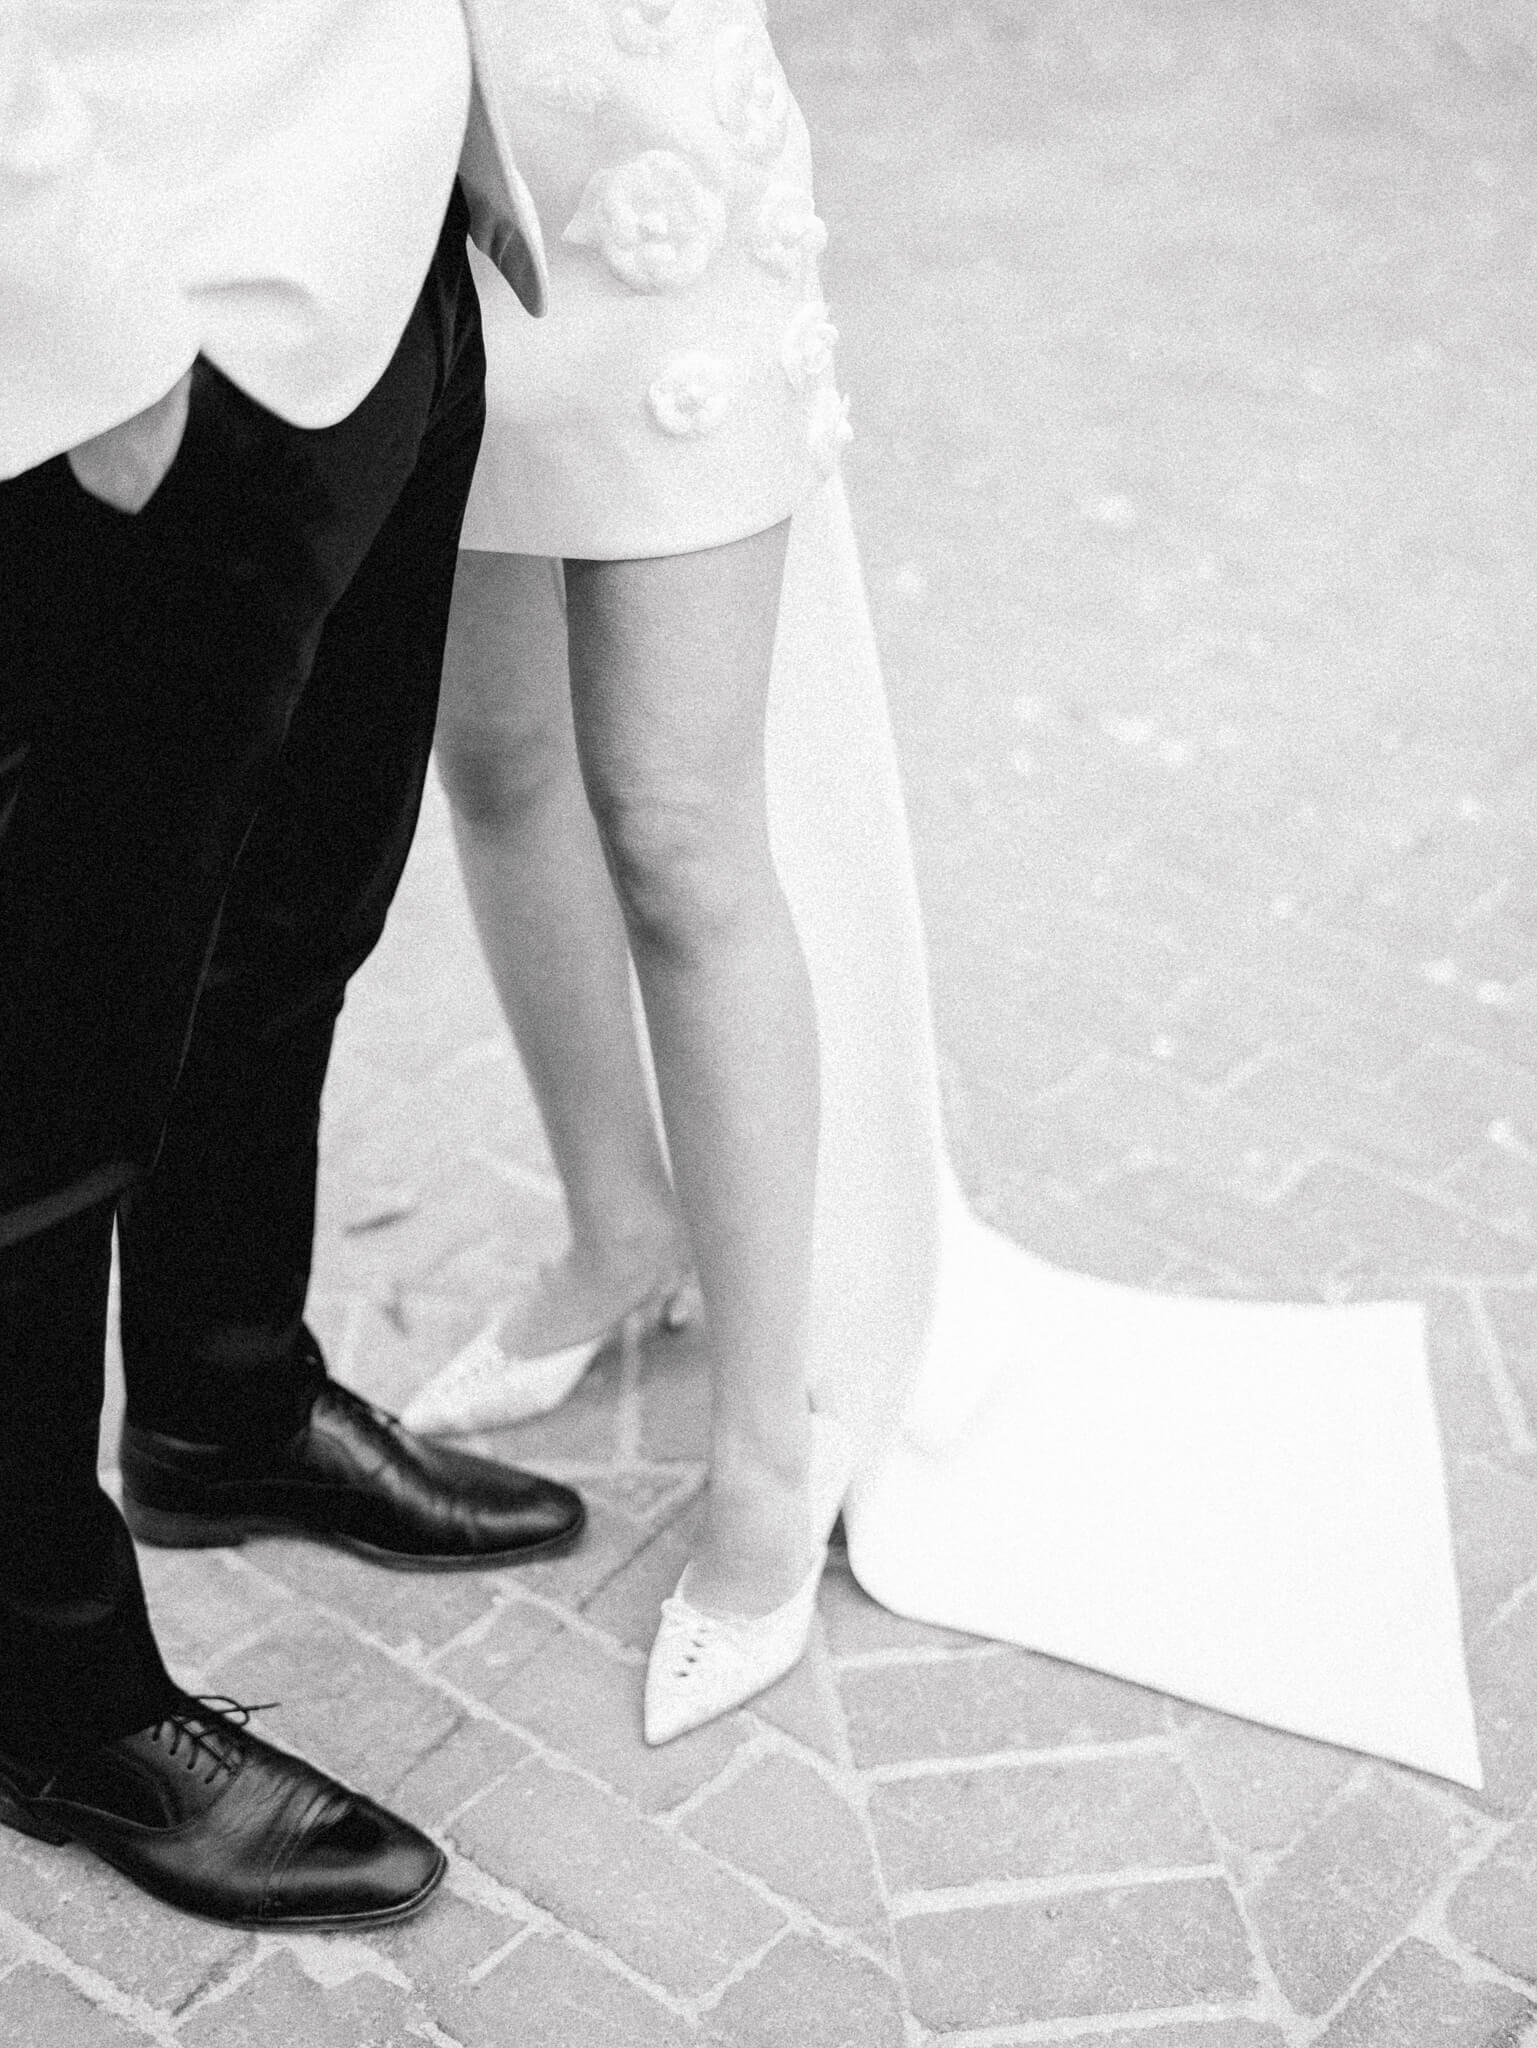 A bride and groom's legs and feet standing closely together wearing a black and white tux and short wedding dress.